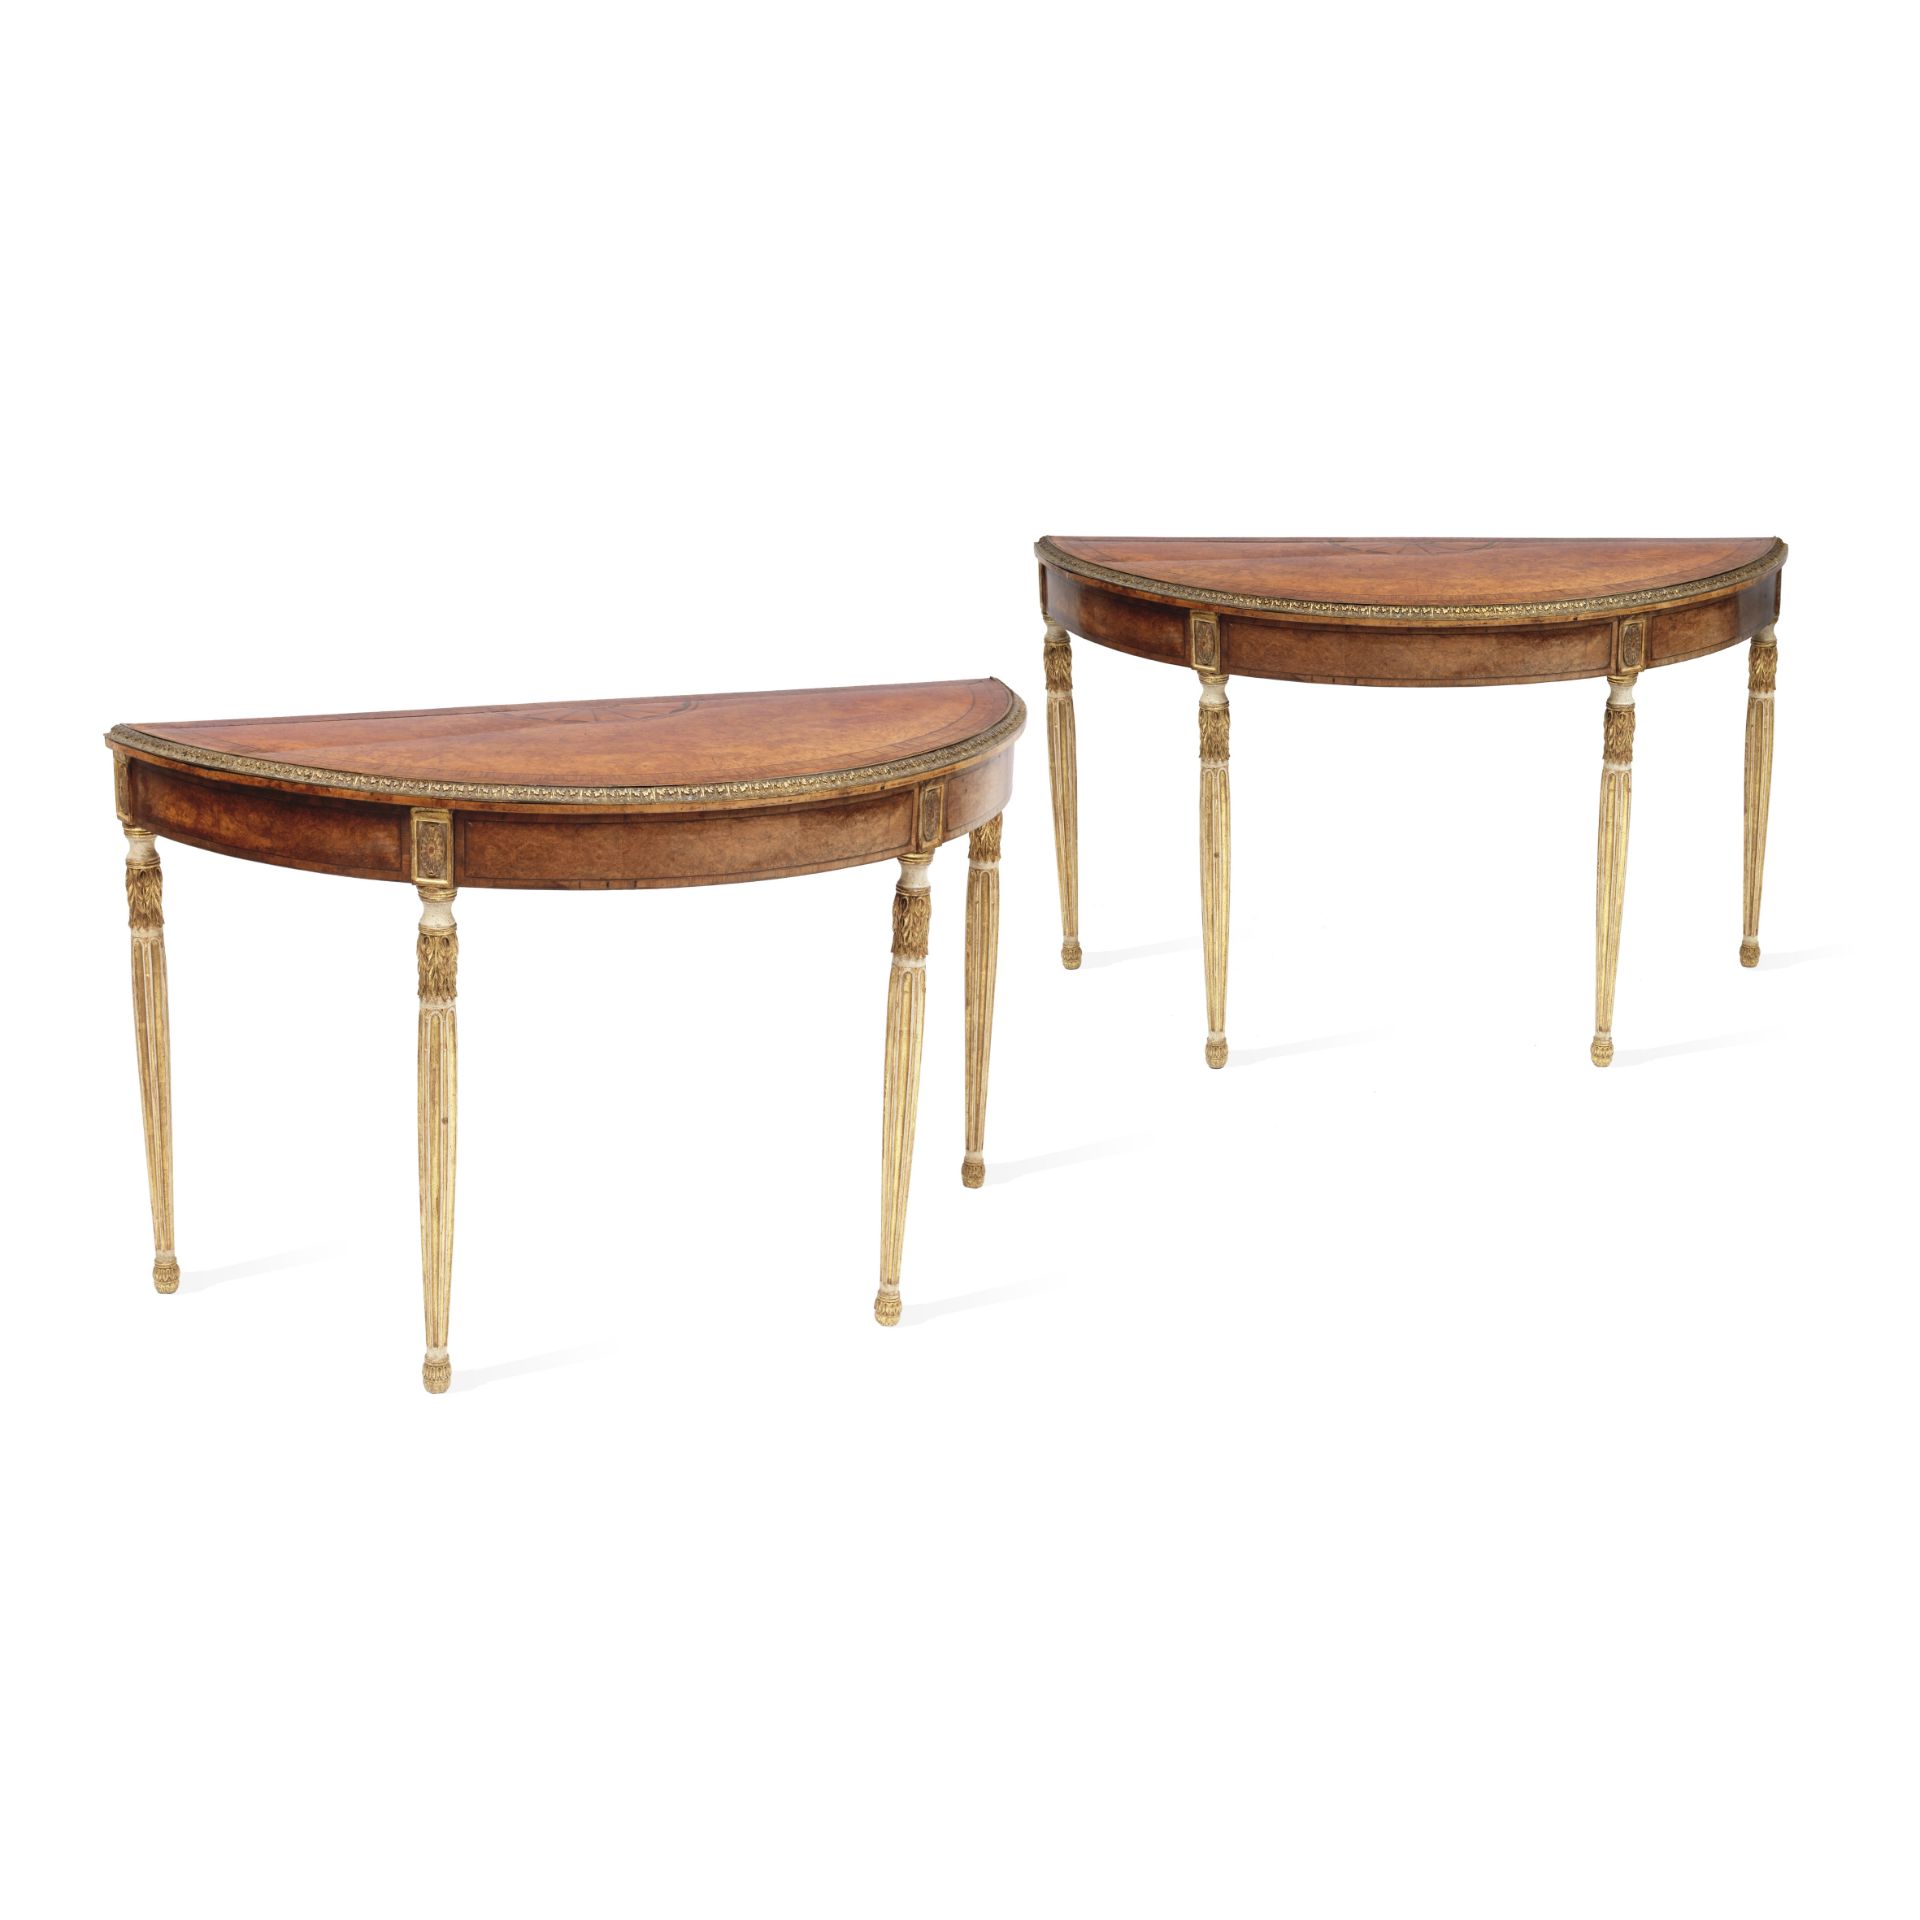 A pair of George III amboyna demi-lune side tables Late 18th century (2)